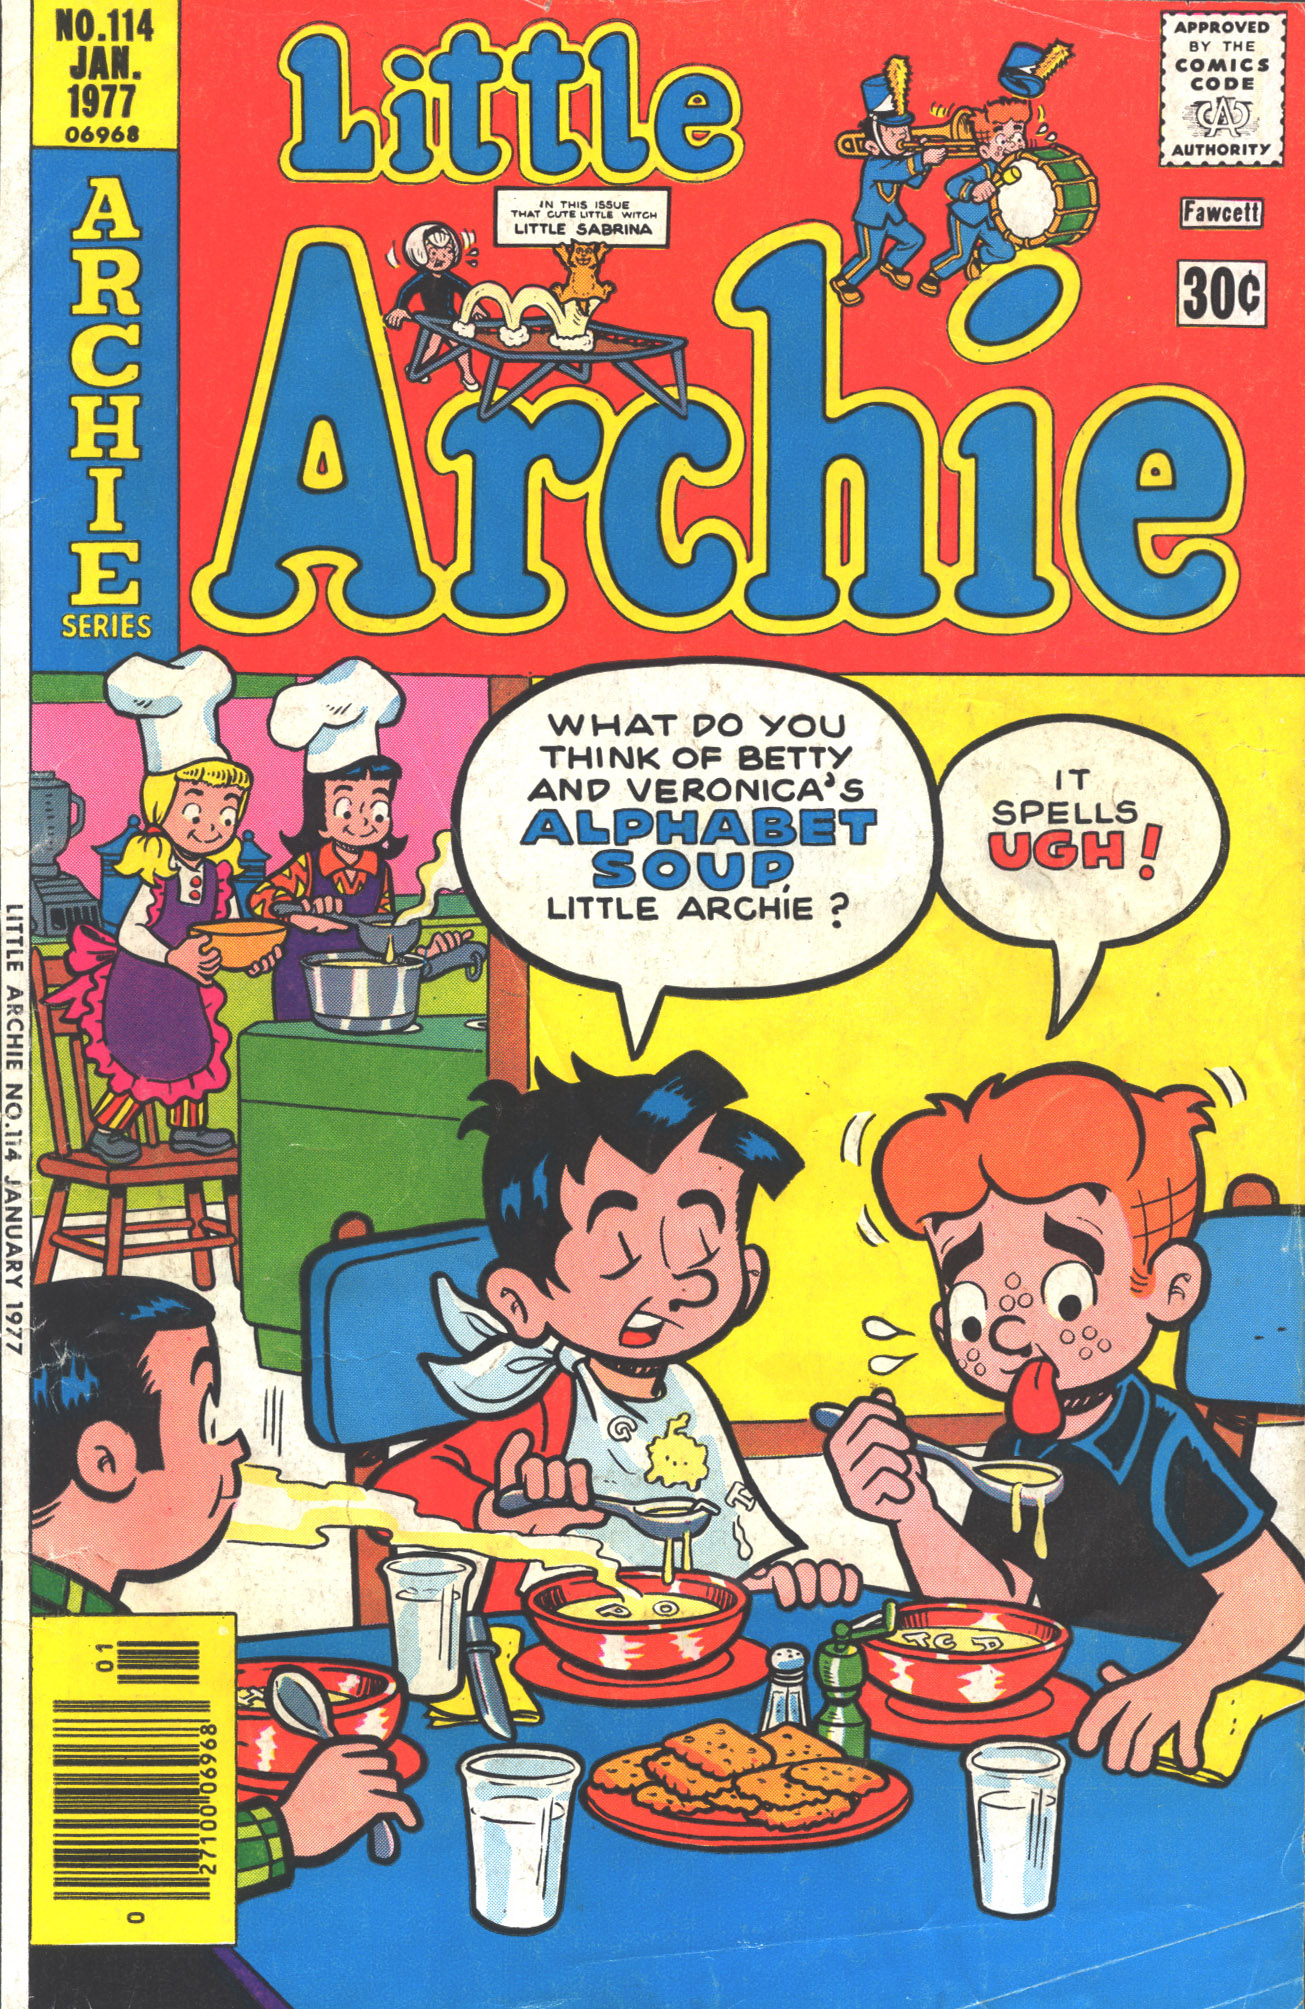 Read online The Adventures of Little Archie comic -  Issue #114 - 1